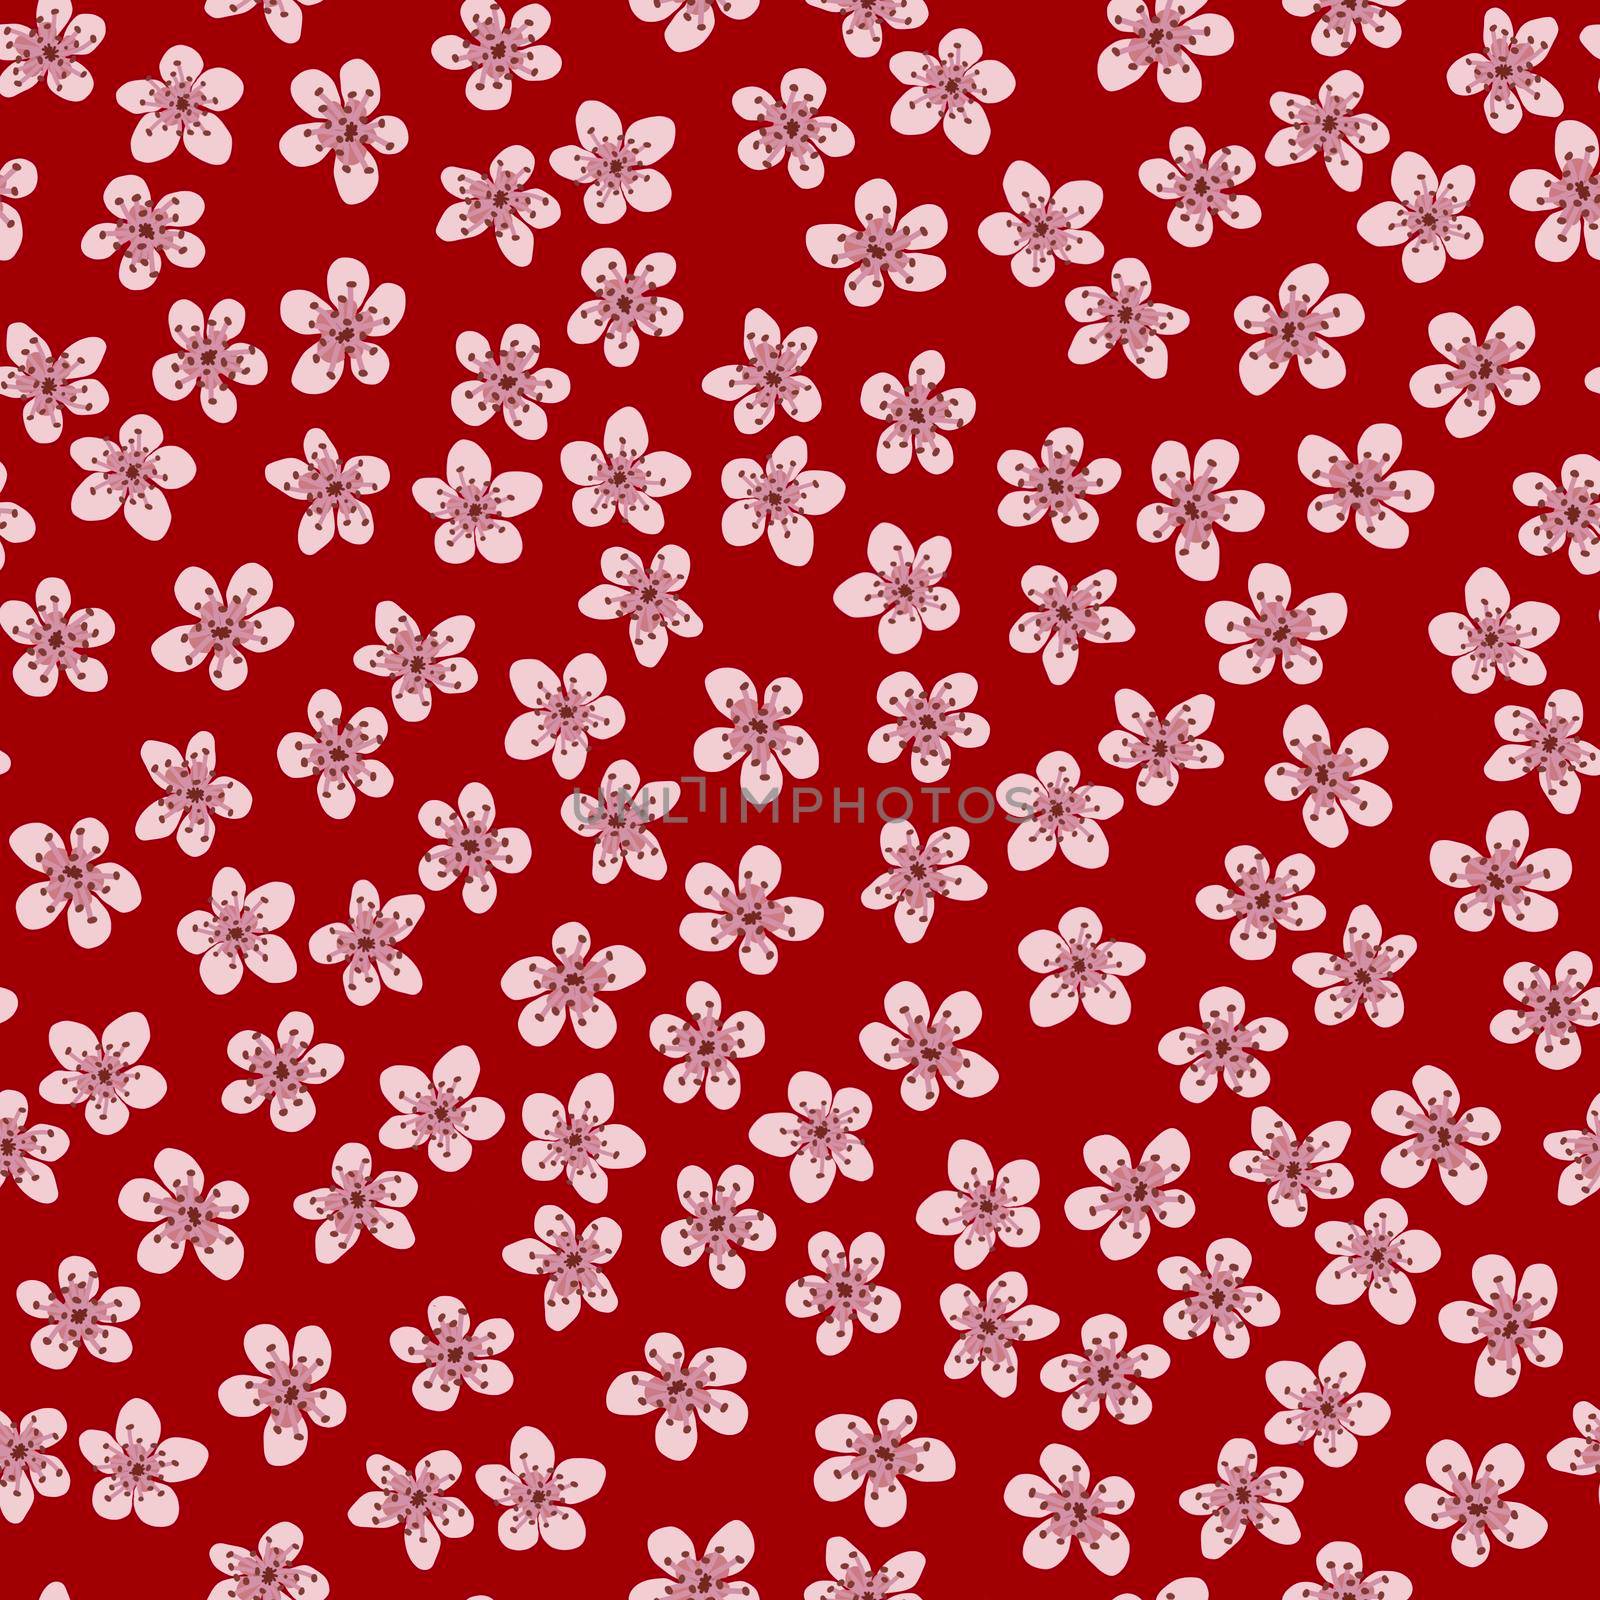 Seamless pattern with blossoming Japanese cherry sakura for fabric, packaging, wallpaper, textile decor, design, invitations, print, gift wrap, manufacturing. Pink flowers on red background